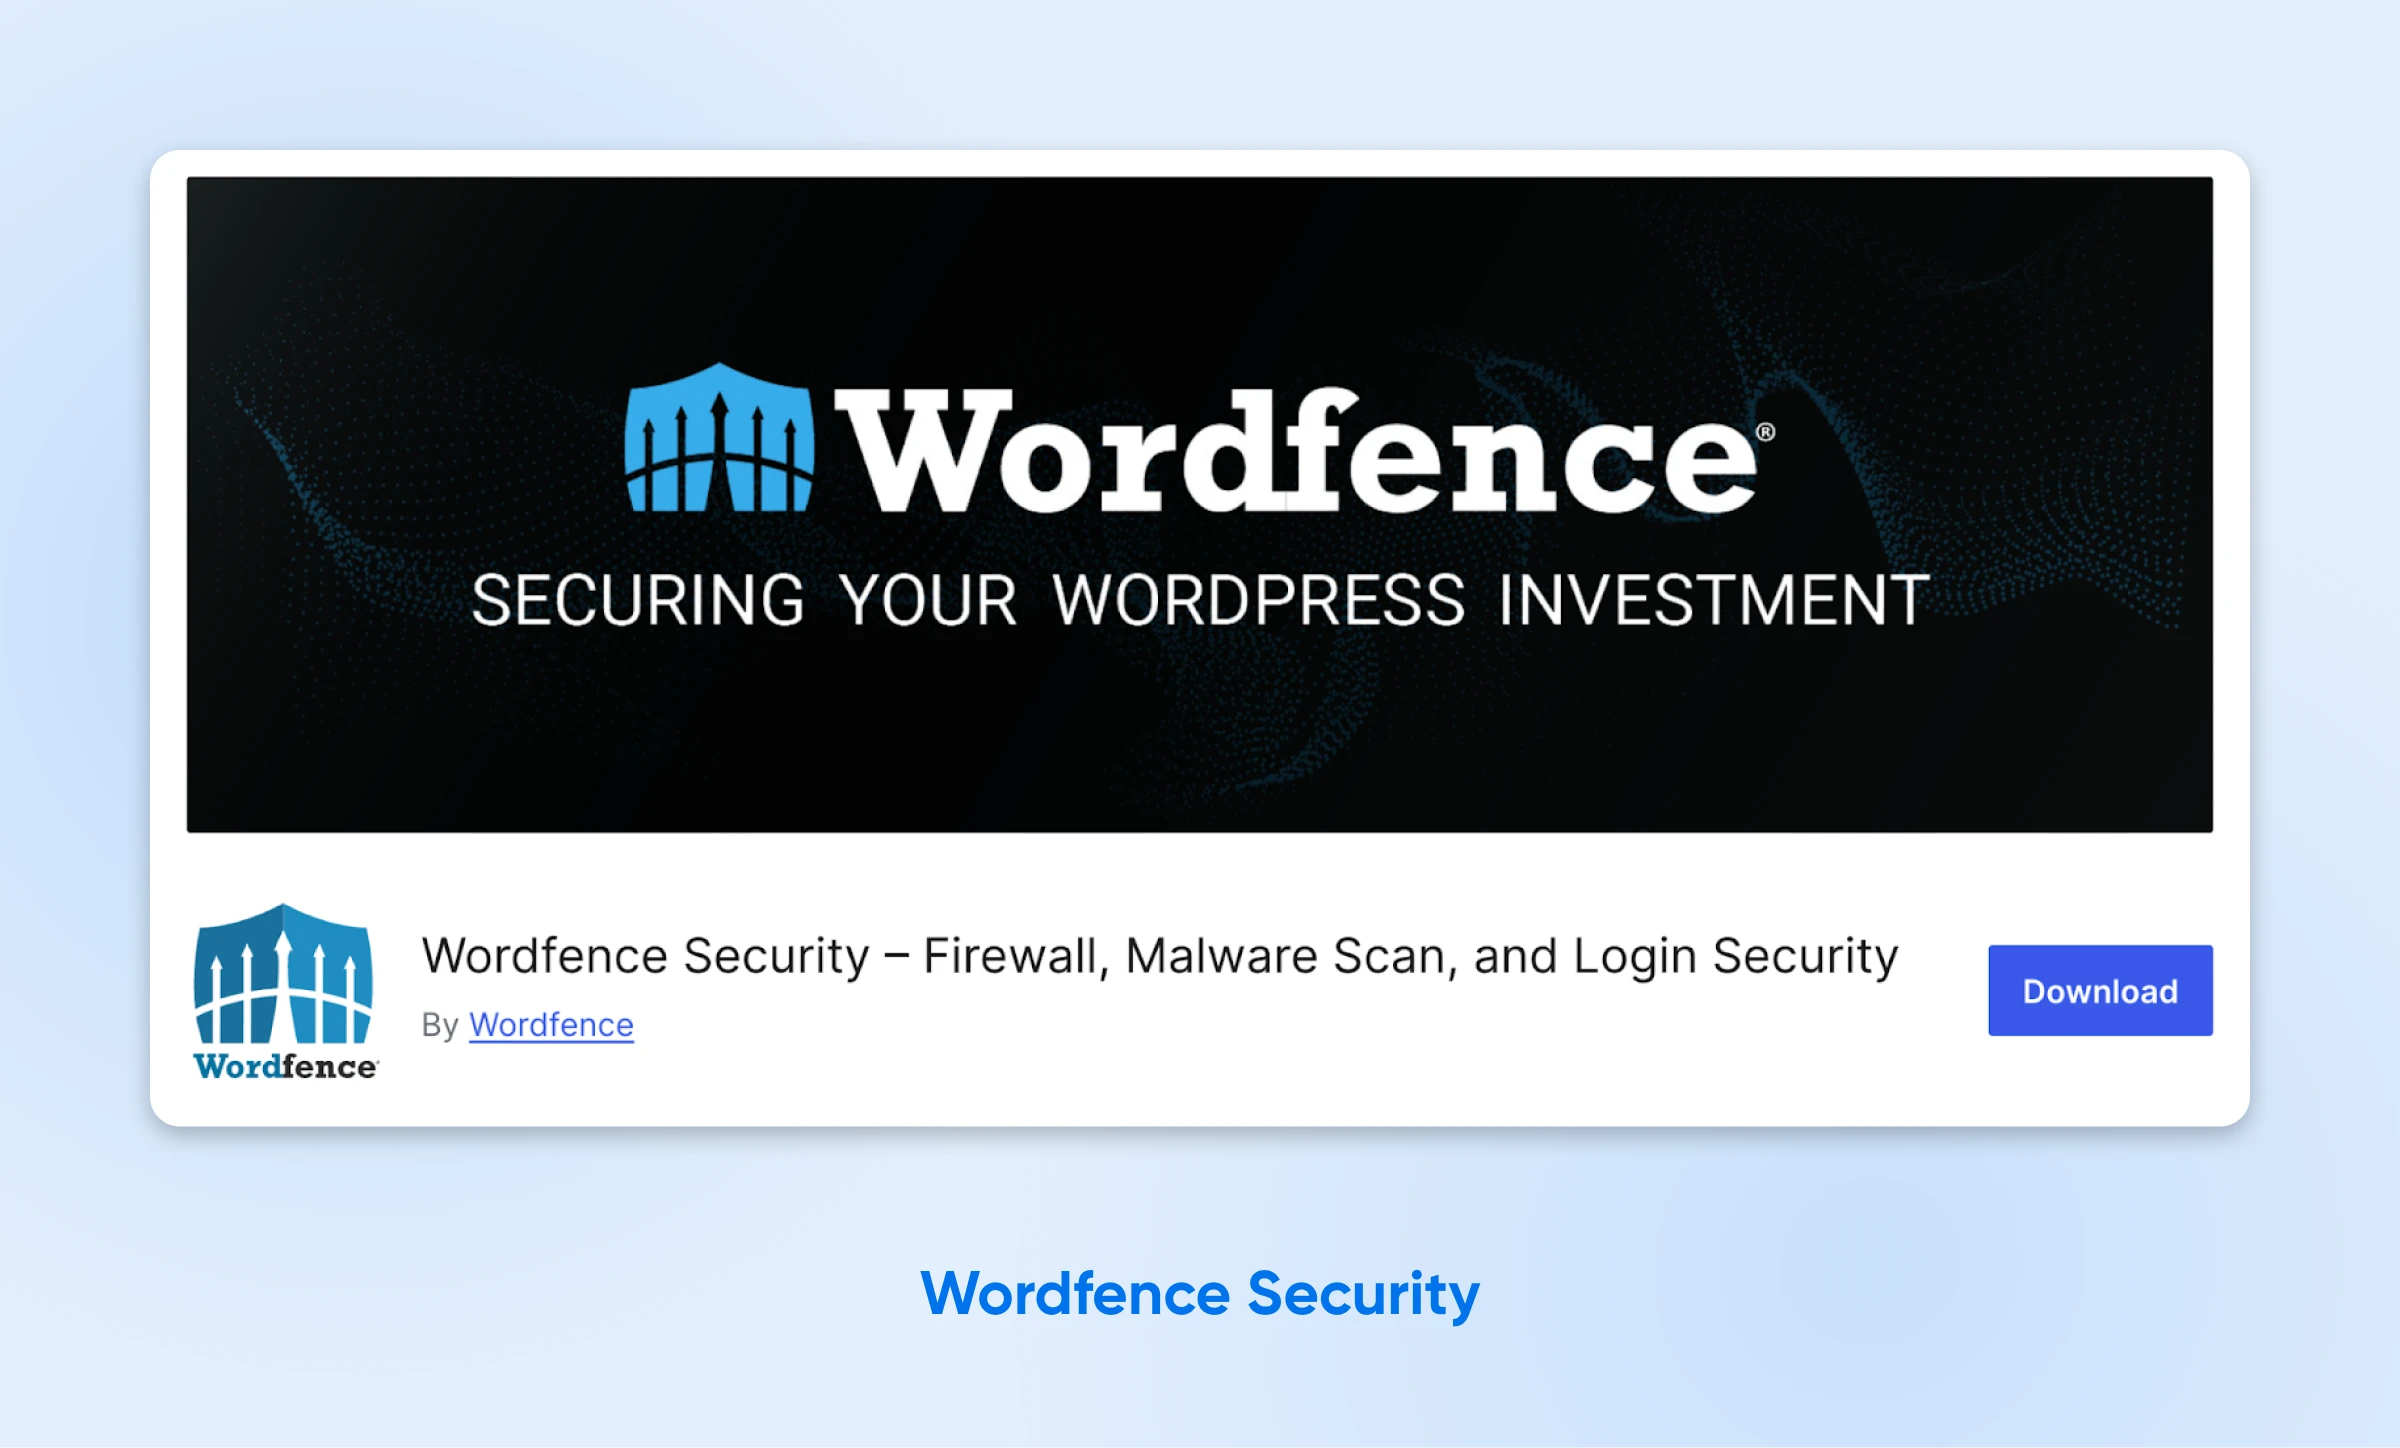 Ad for the Wordfence Security plugin, offering firewall, malware scan, and login security features to secure WP websites.